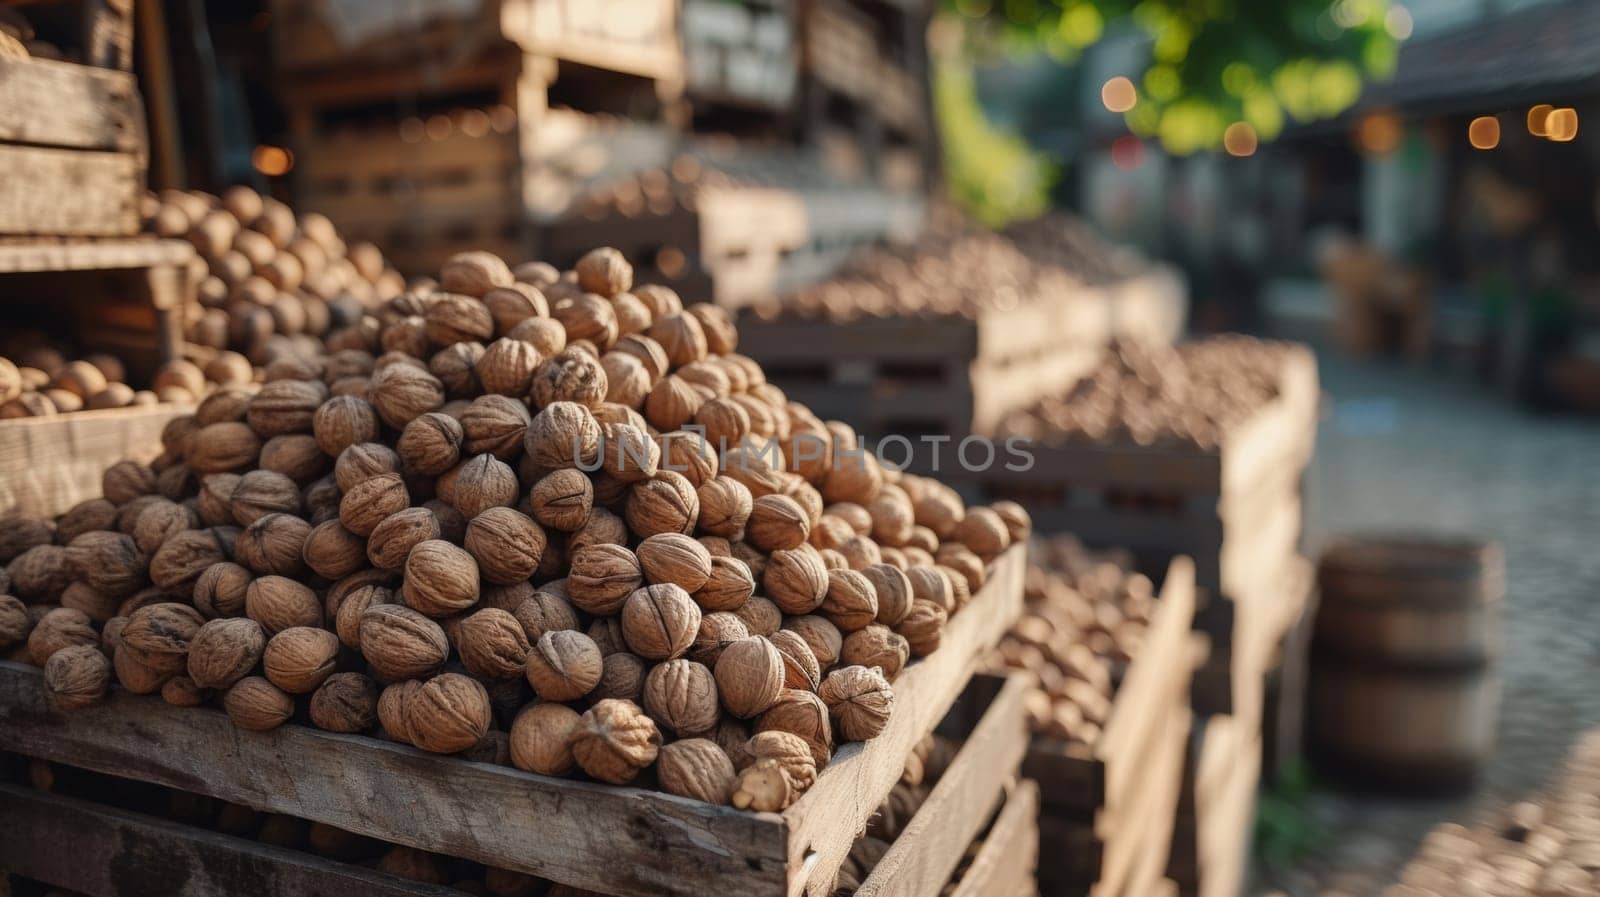 A pile of walnuts in a wooden crate on top of another